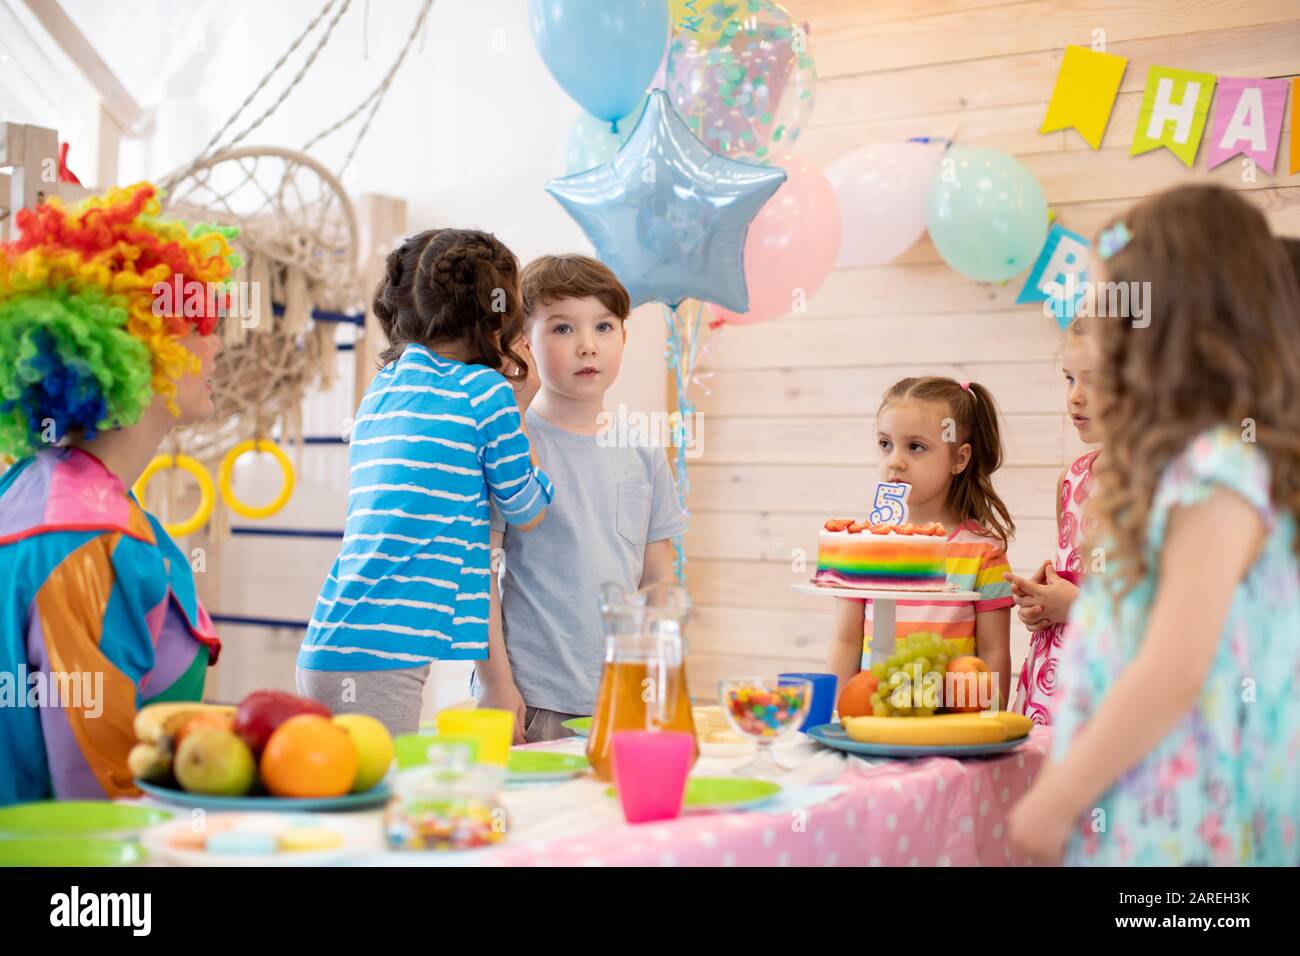 Group of adorable kids standing around festive table at party. Little girl congratulating birthday boy. Stock Photo